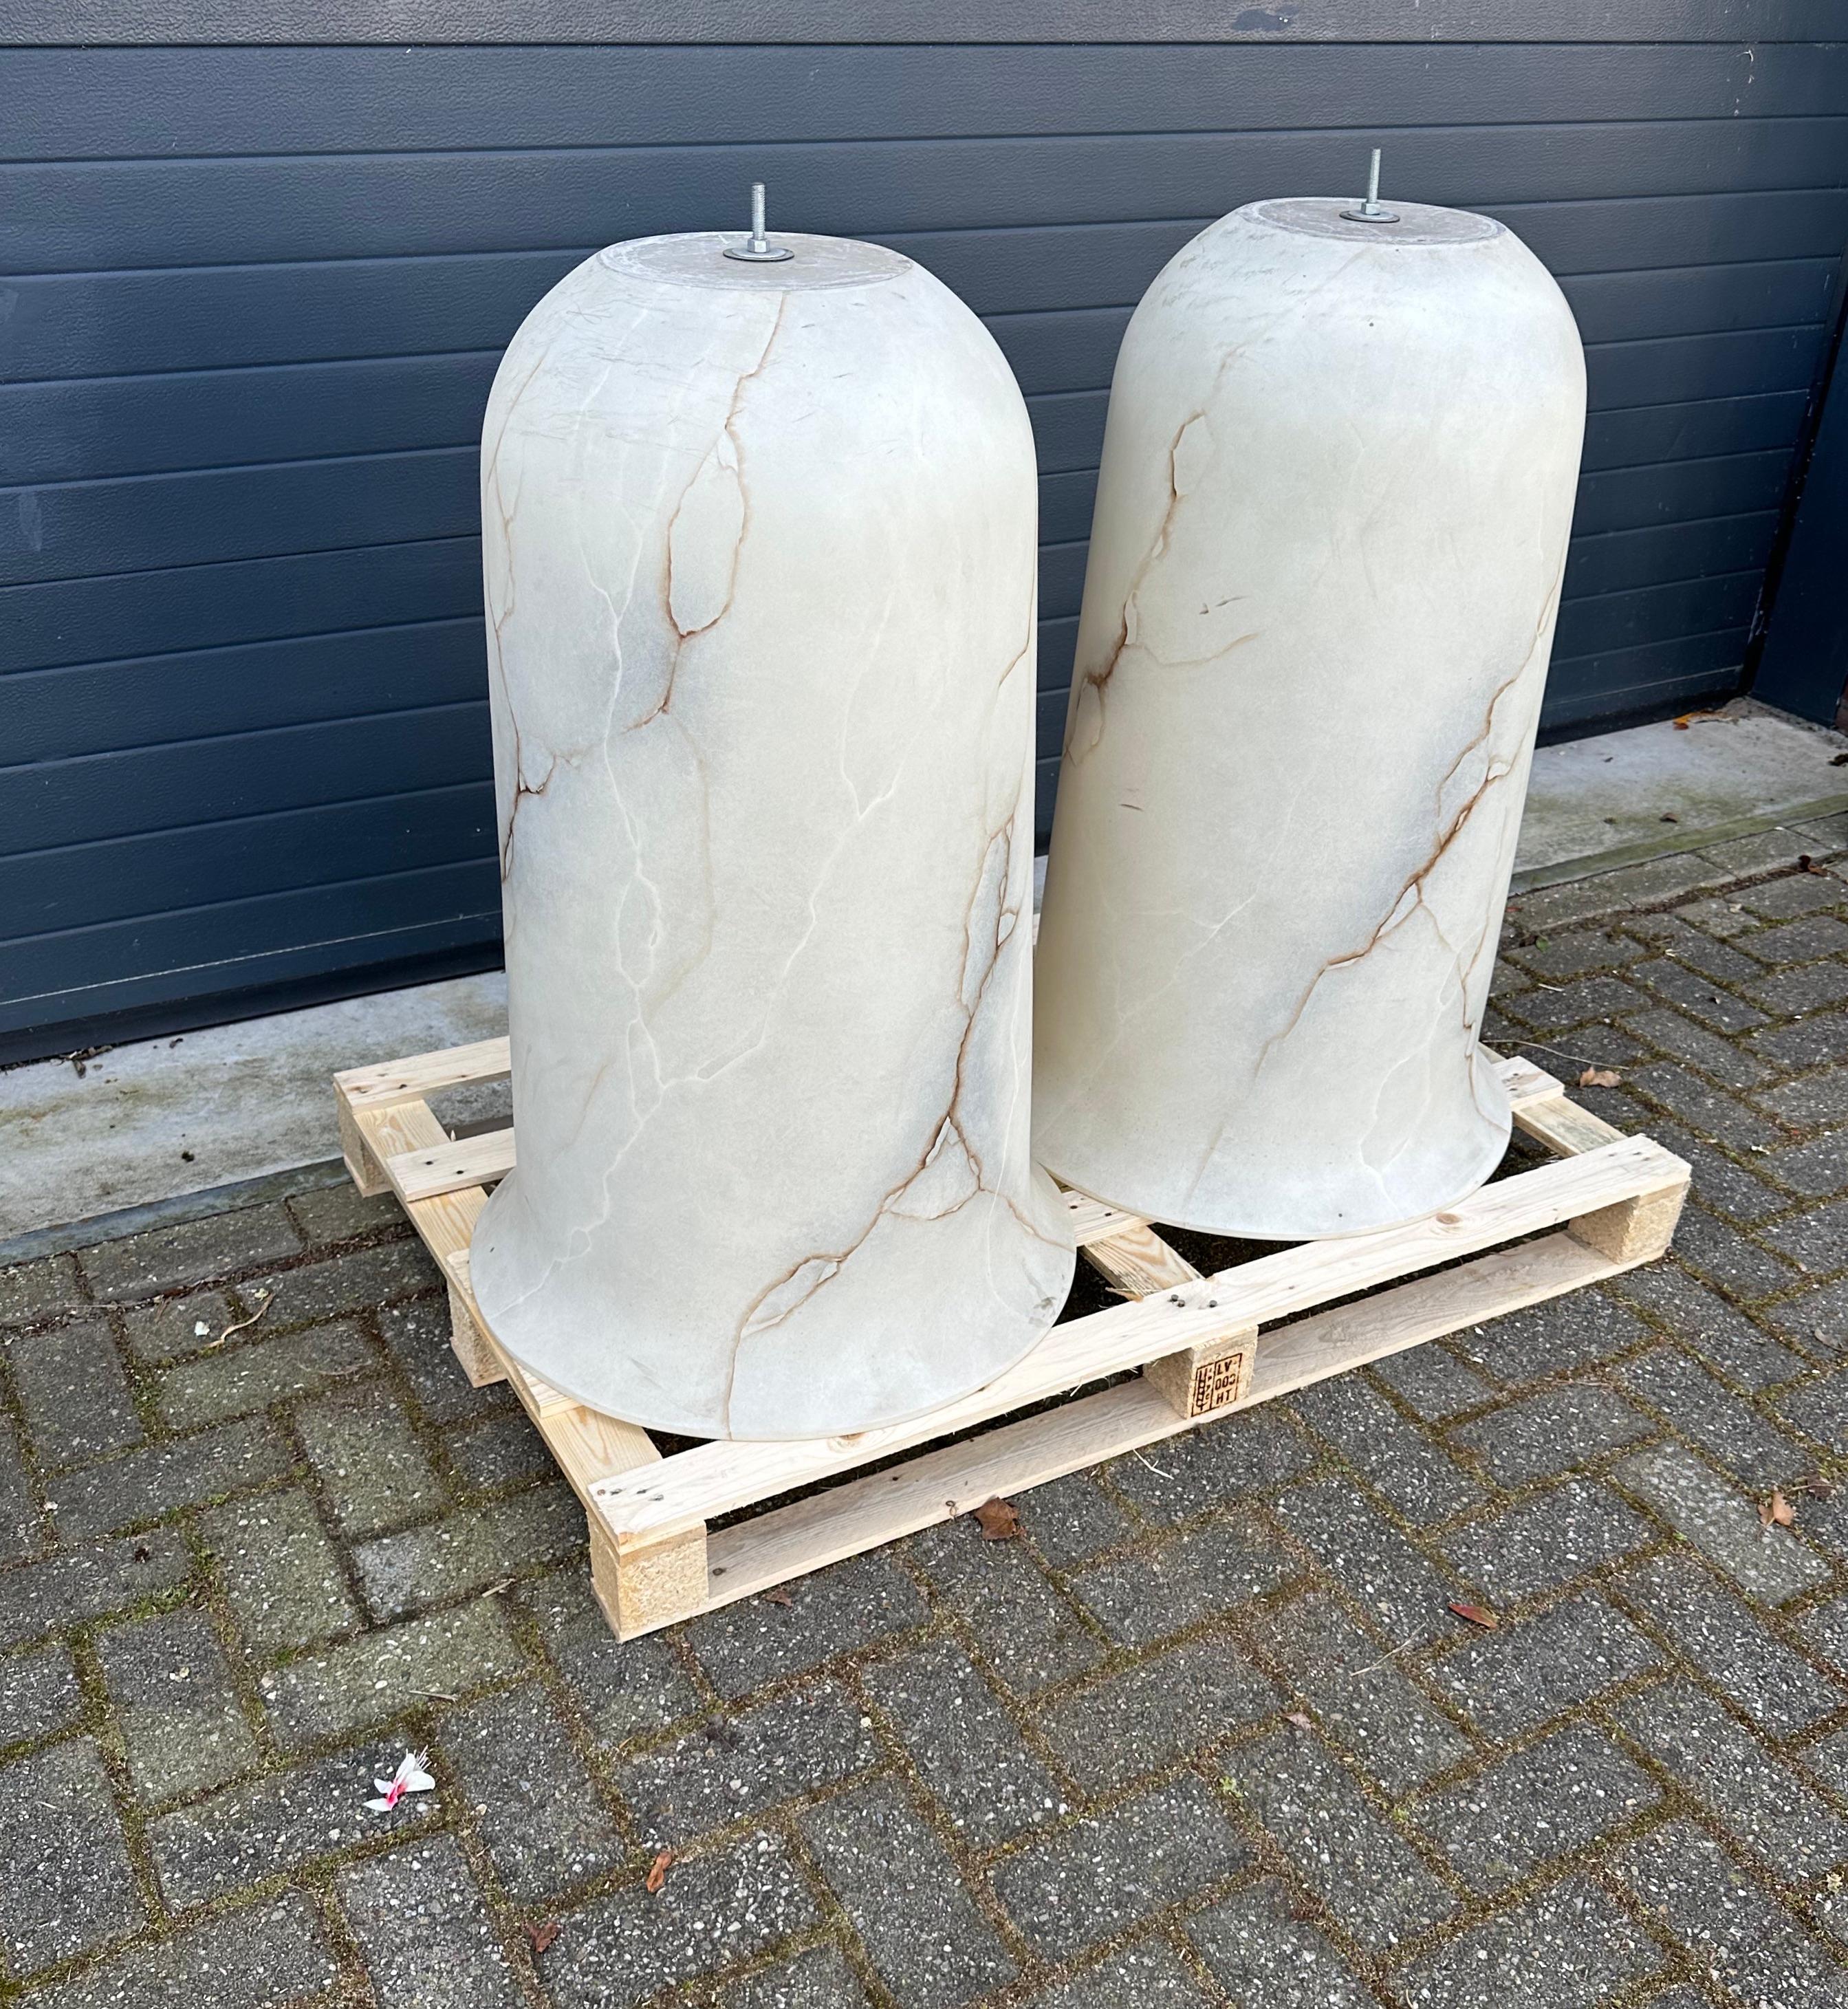 Extremely rare and realistic pair of ultra large alabaster-like chandeliers with 6 socket each.

If you are looking for a truly large and unique pair of timeless light fixtures then these faux alabaster pendants could be the perfect solution to